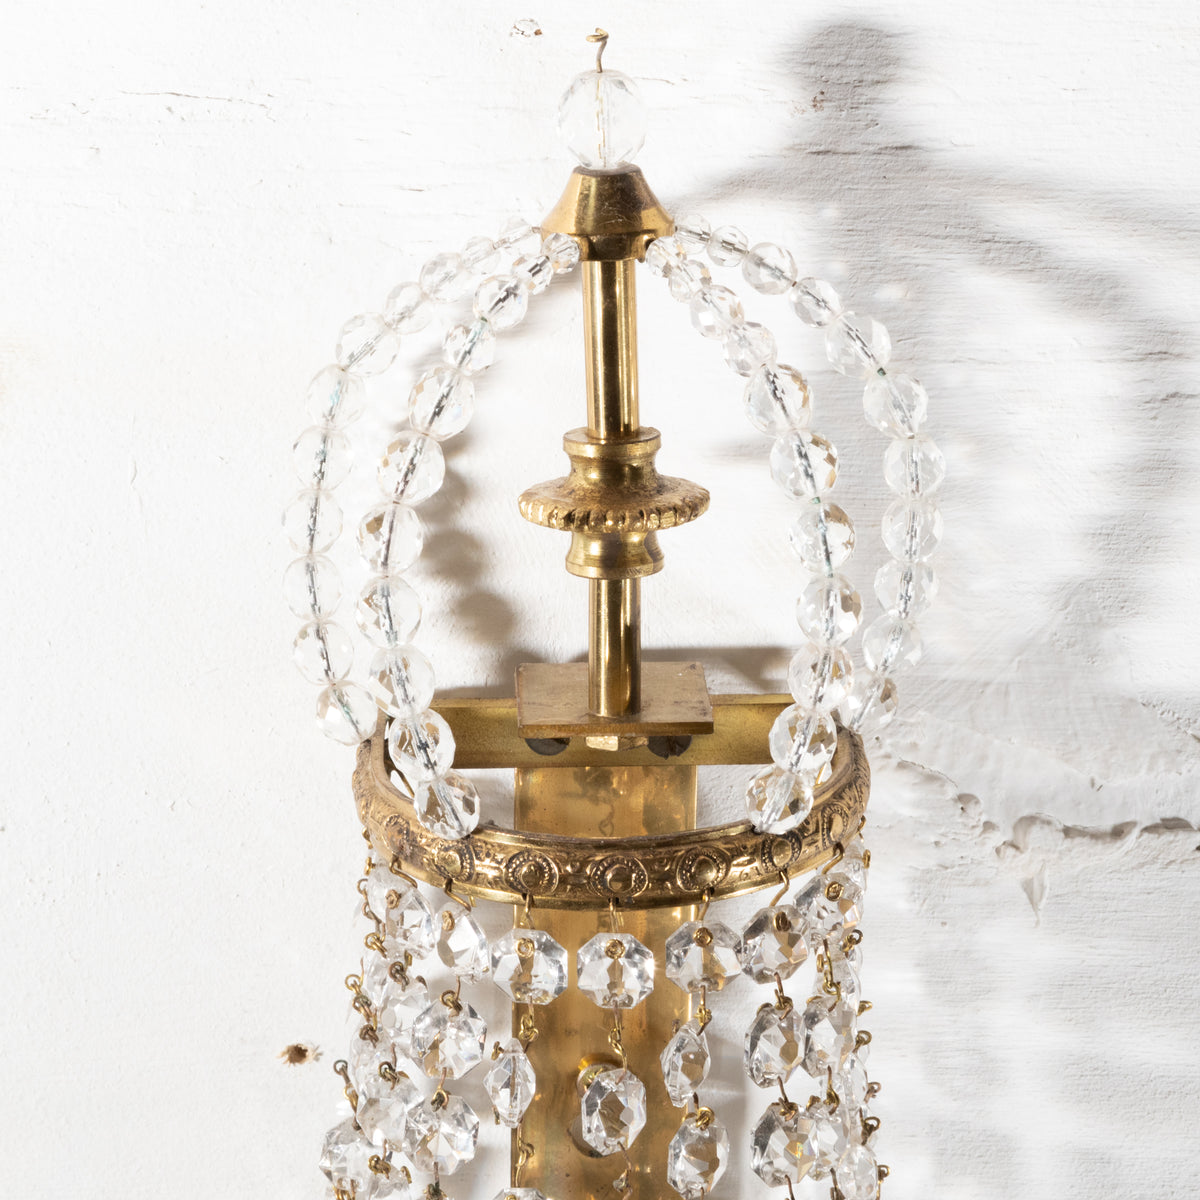 Reclaimed Brass and Crystal Chandelier Wall Light Sconces (4 Available) | The Architectural Forum